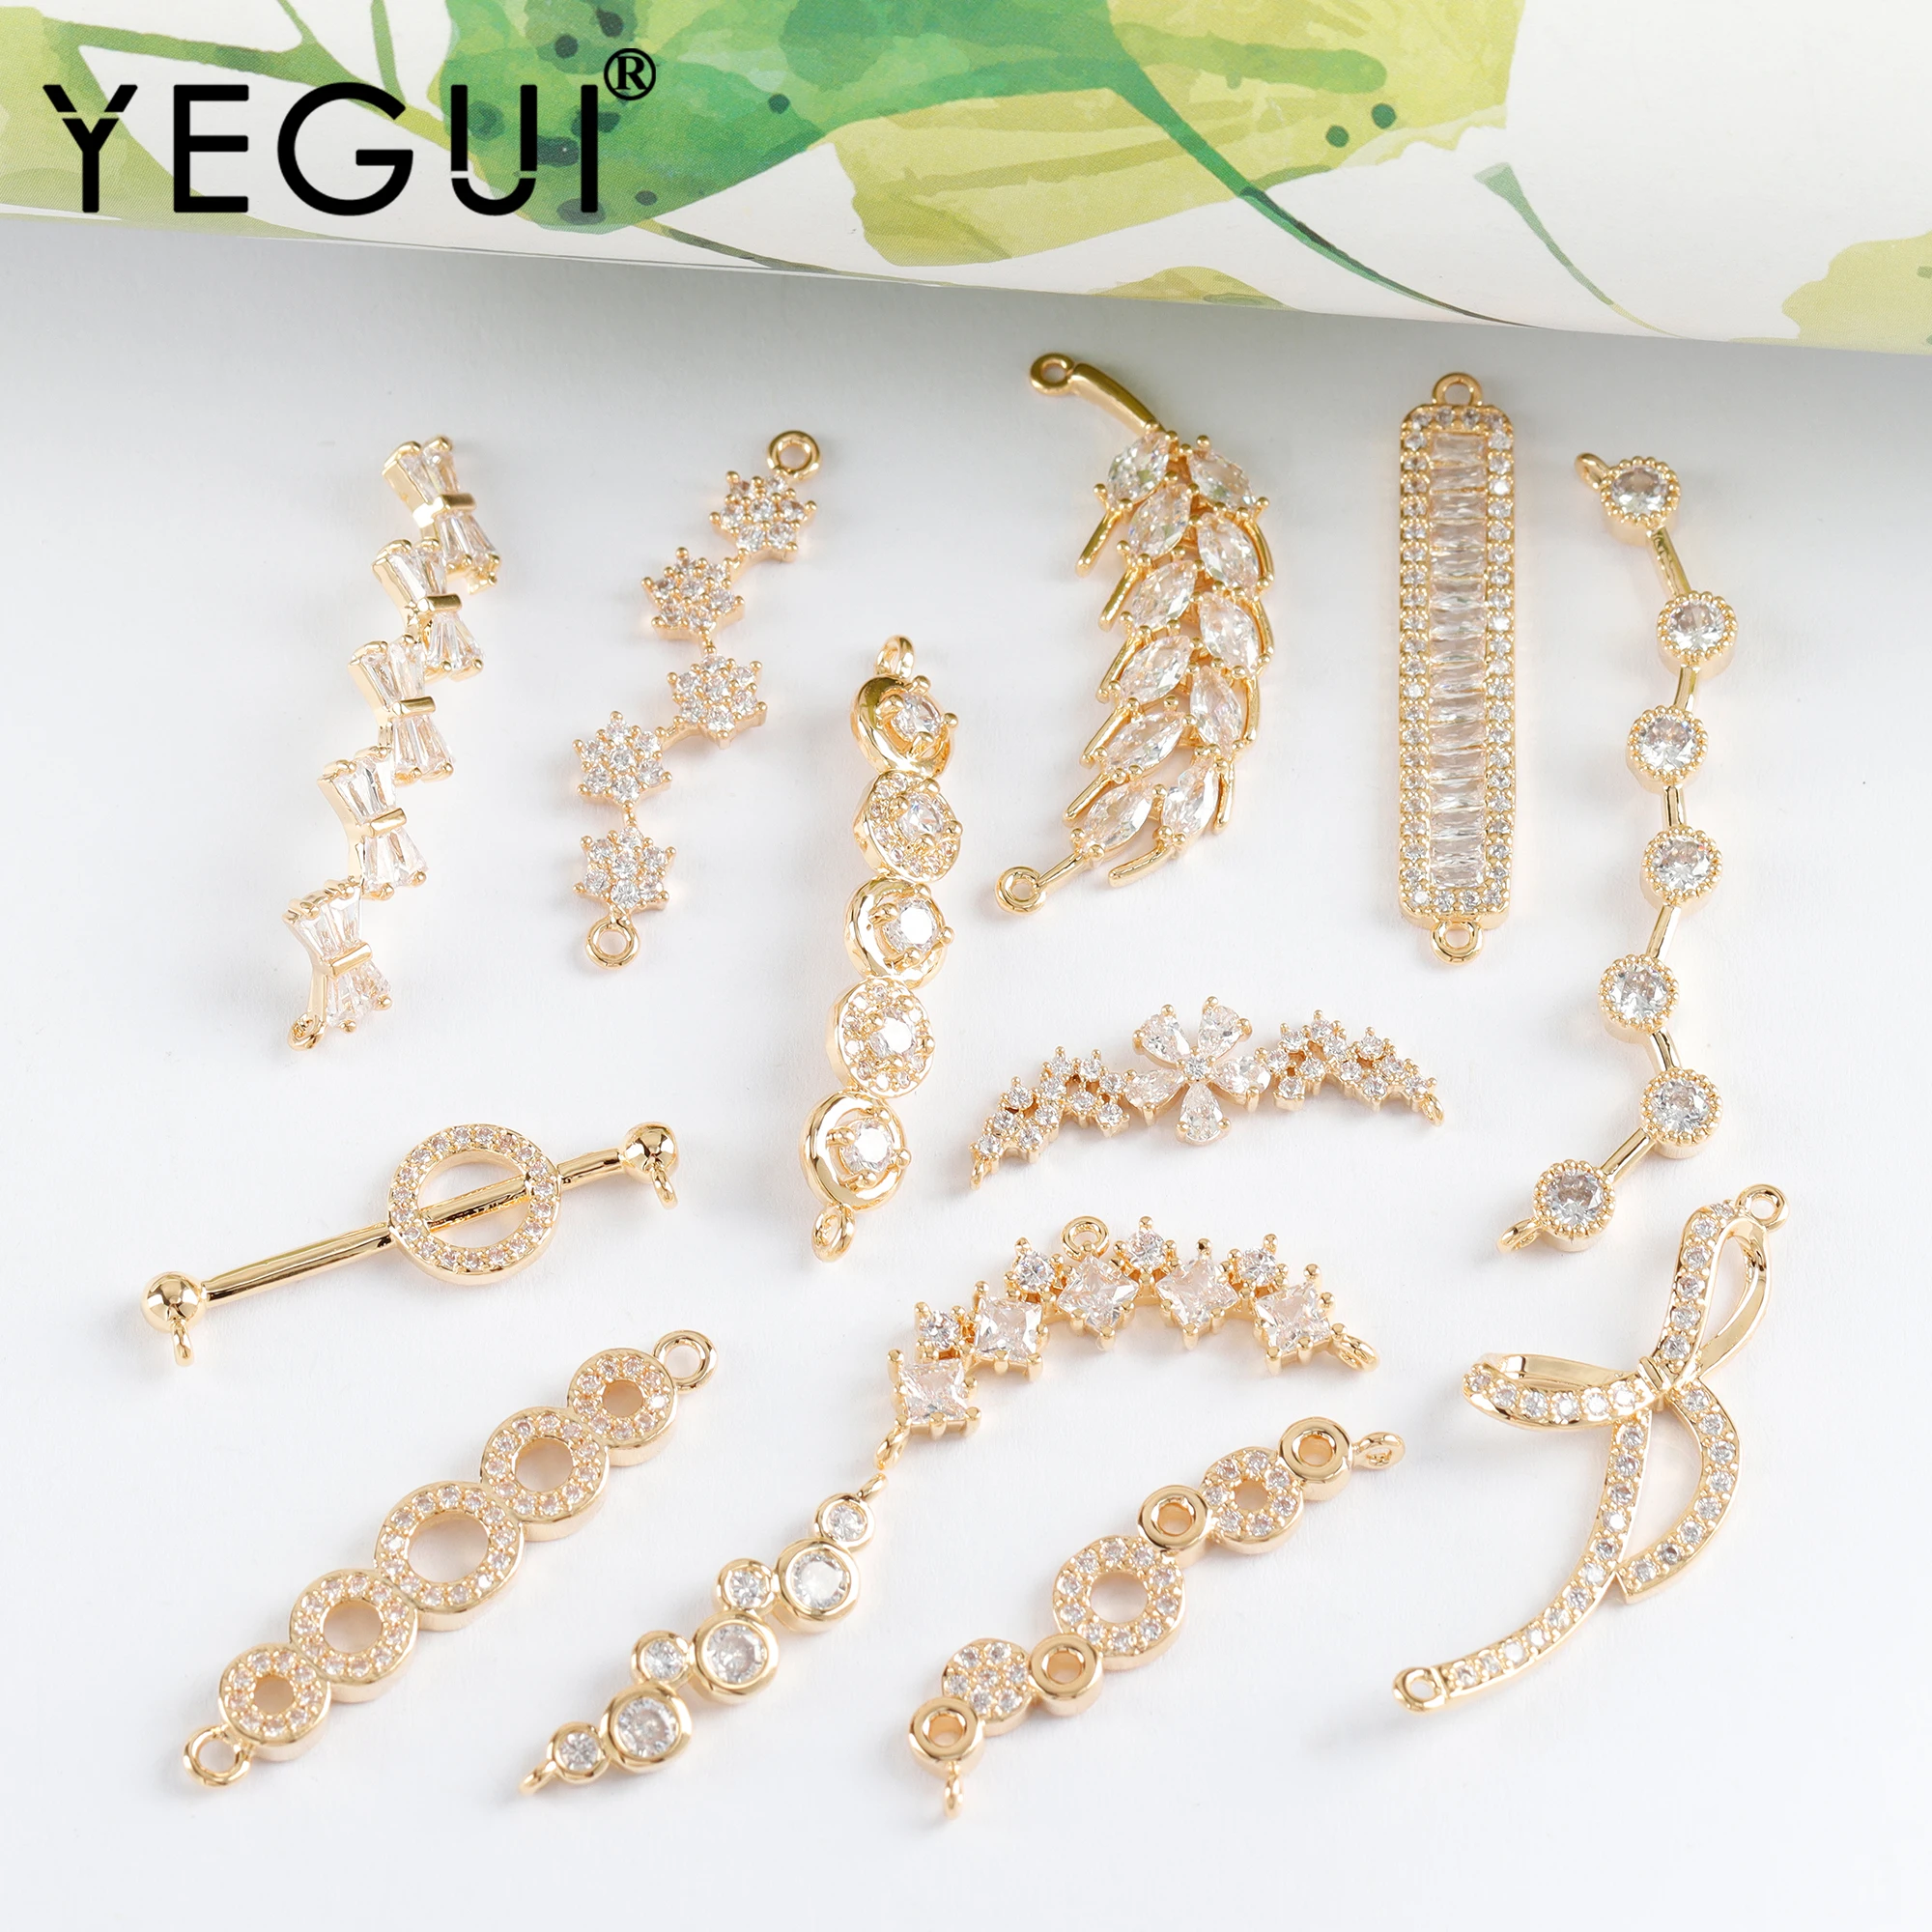 

YEGUI M1042,jewelry accessories,18k gold plated,copper metal,zircons,charms,jump ring,diy earrings,jewelry making,6pcs/lot